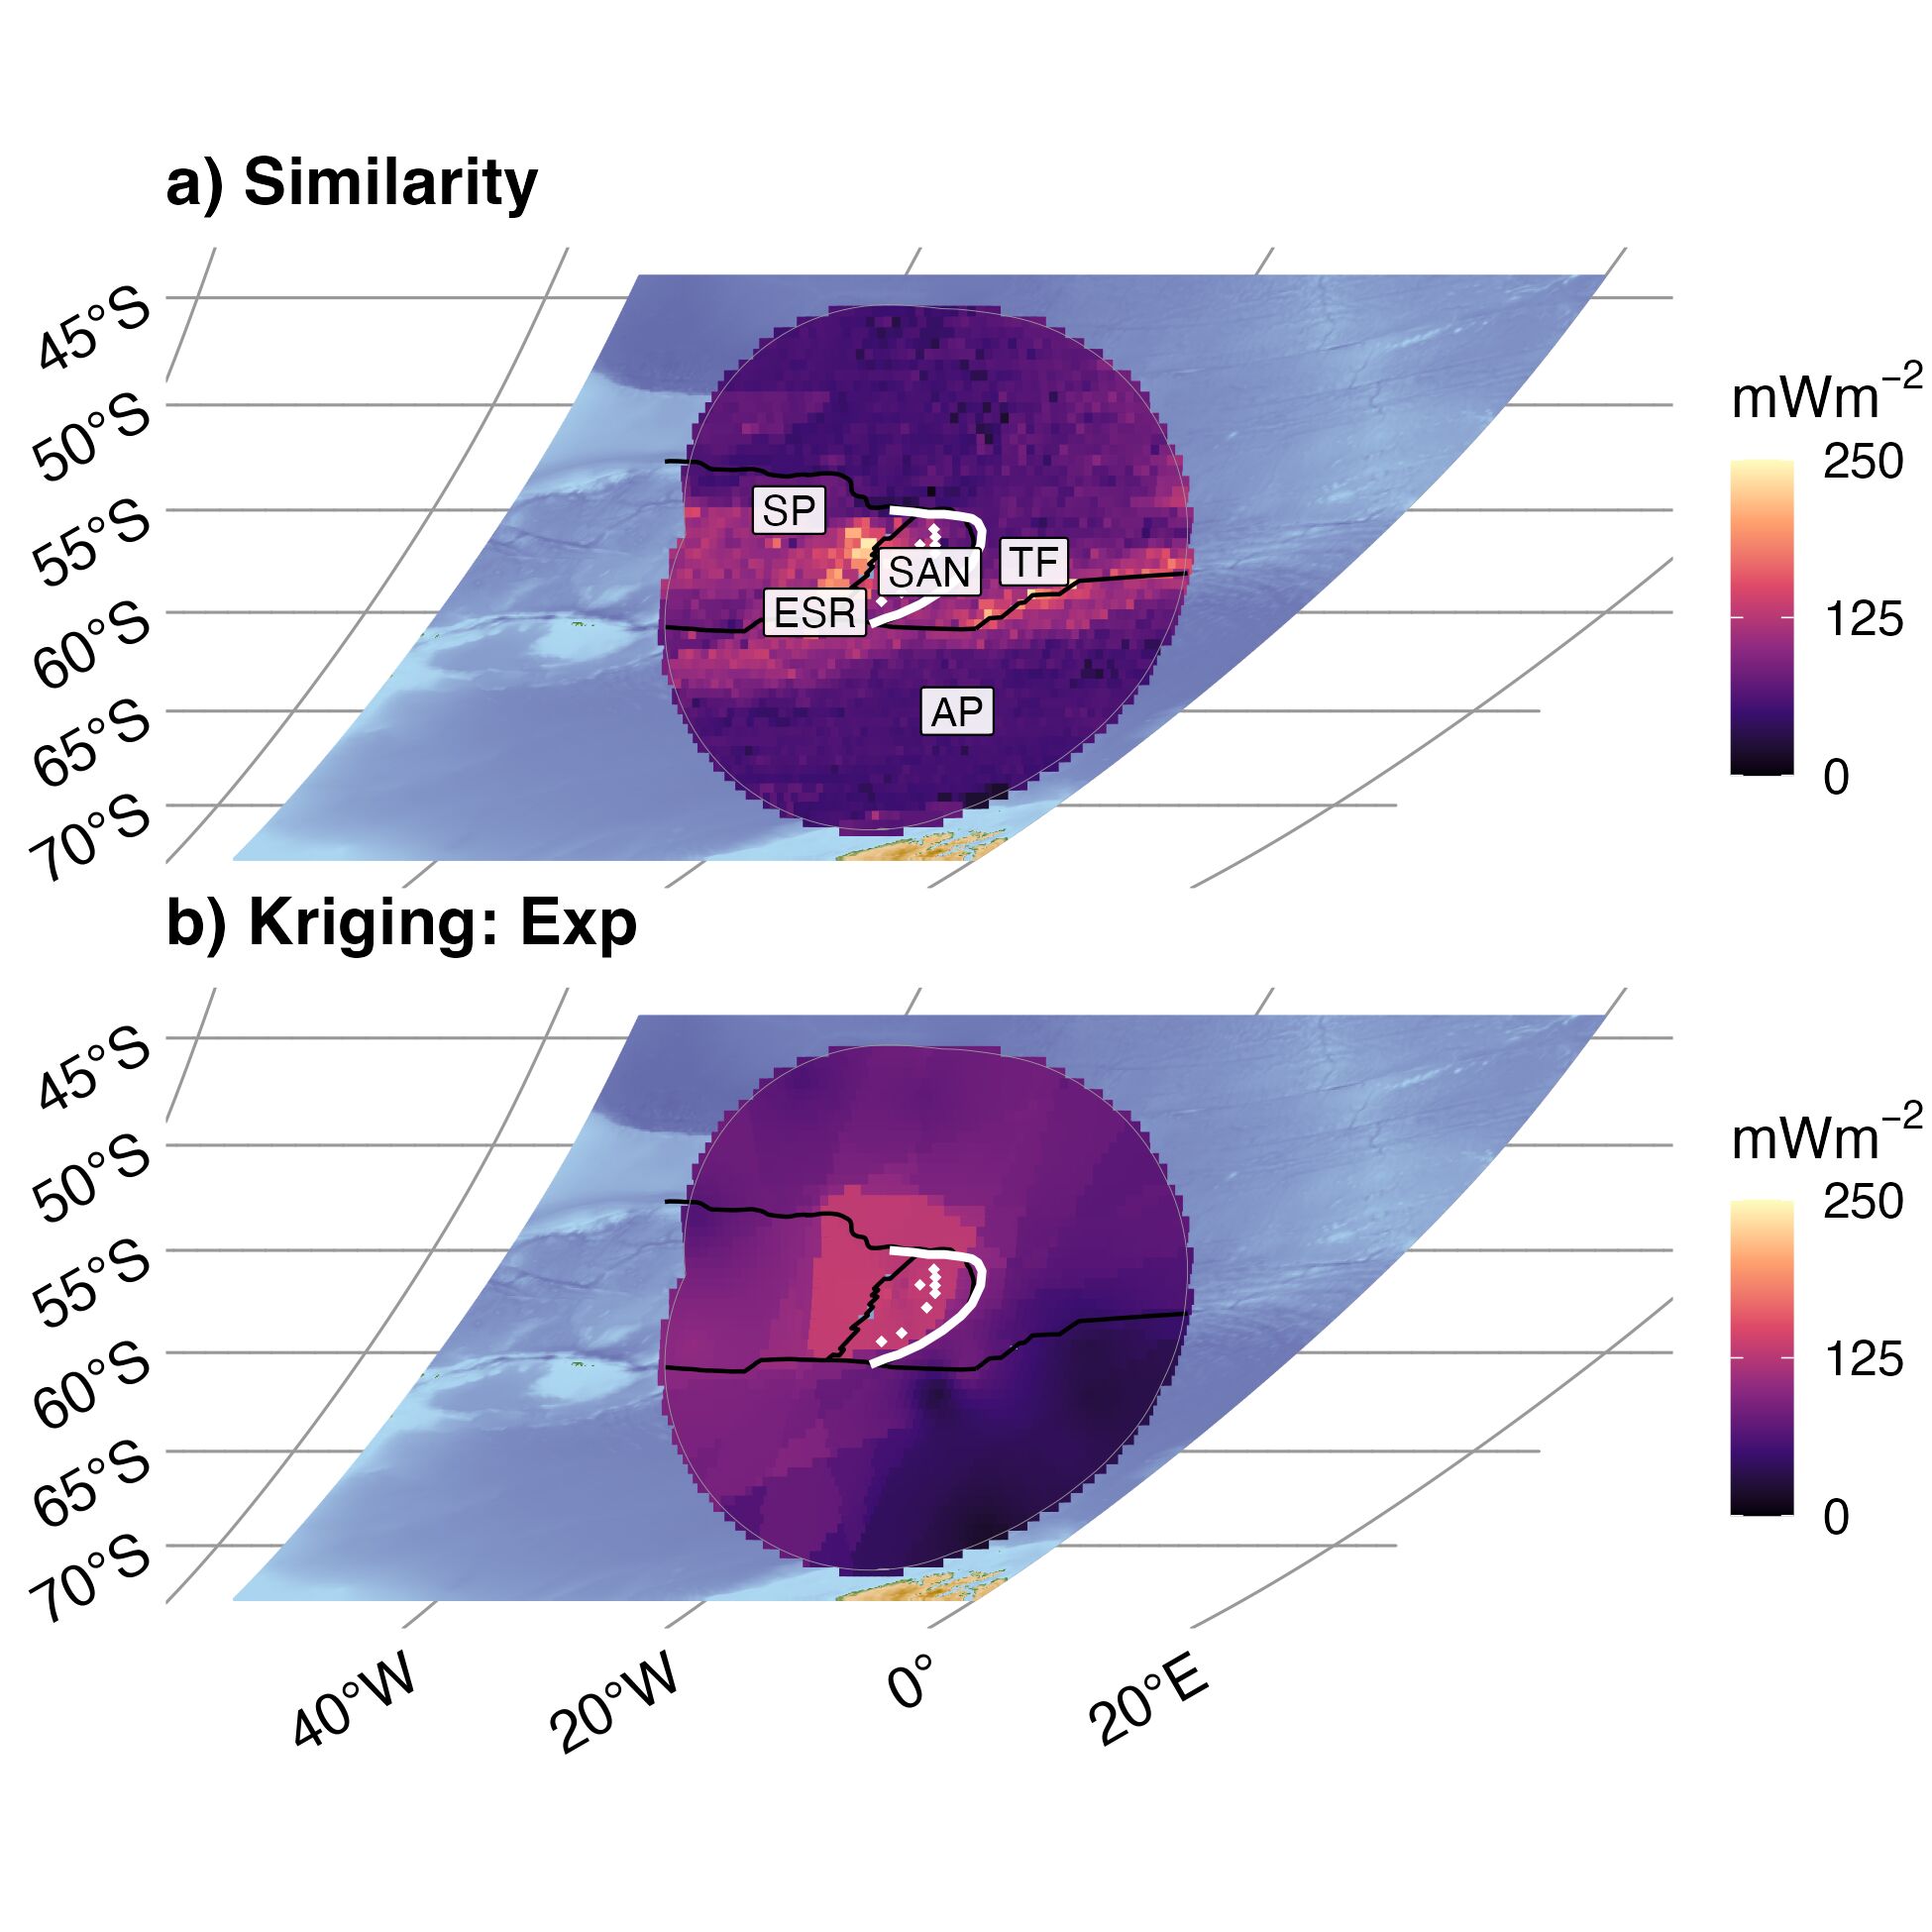 Similarity and Kriging interpolations for Scotia. Despite extremely sparse data (n = 25), (a) Similarity identifies two tectonic features, the East Scotia Ridge (ESR) and a transform fault (TF) separating the Scotia and Sandwich Plates (SP, SAN) from the Antartic Plate (AP). (b) Kriging predicts a high heat flow anomaly in the region of the ESR, and a few low heat flow anomalies in the AP, but otherwise appears featureless due to sparse data. Segment boundary (bold white line) and volcanoes (gold diamonds) defined by Syracuse & Abers (2006). Similarity interpolation from Lucazeau (2019). Plate boundaries (bold black lines) defined by Lawver et al. (2018).